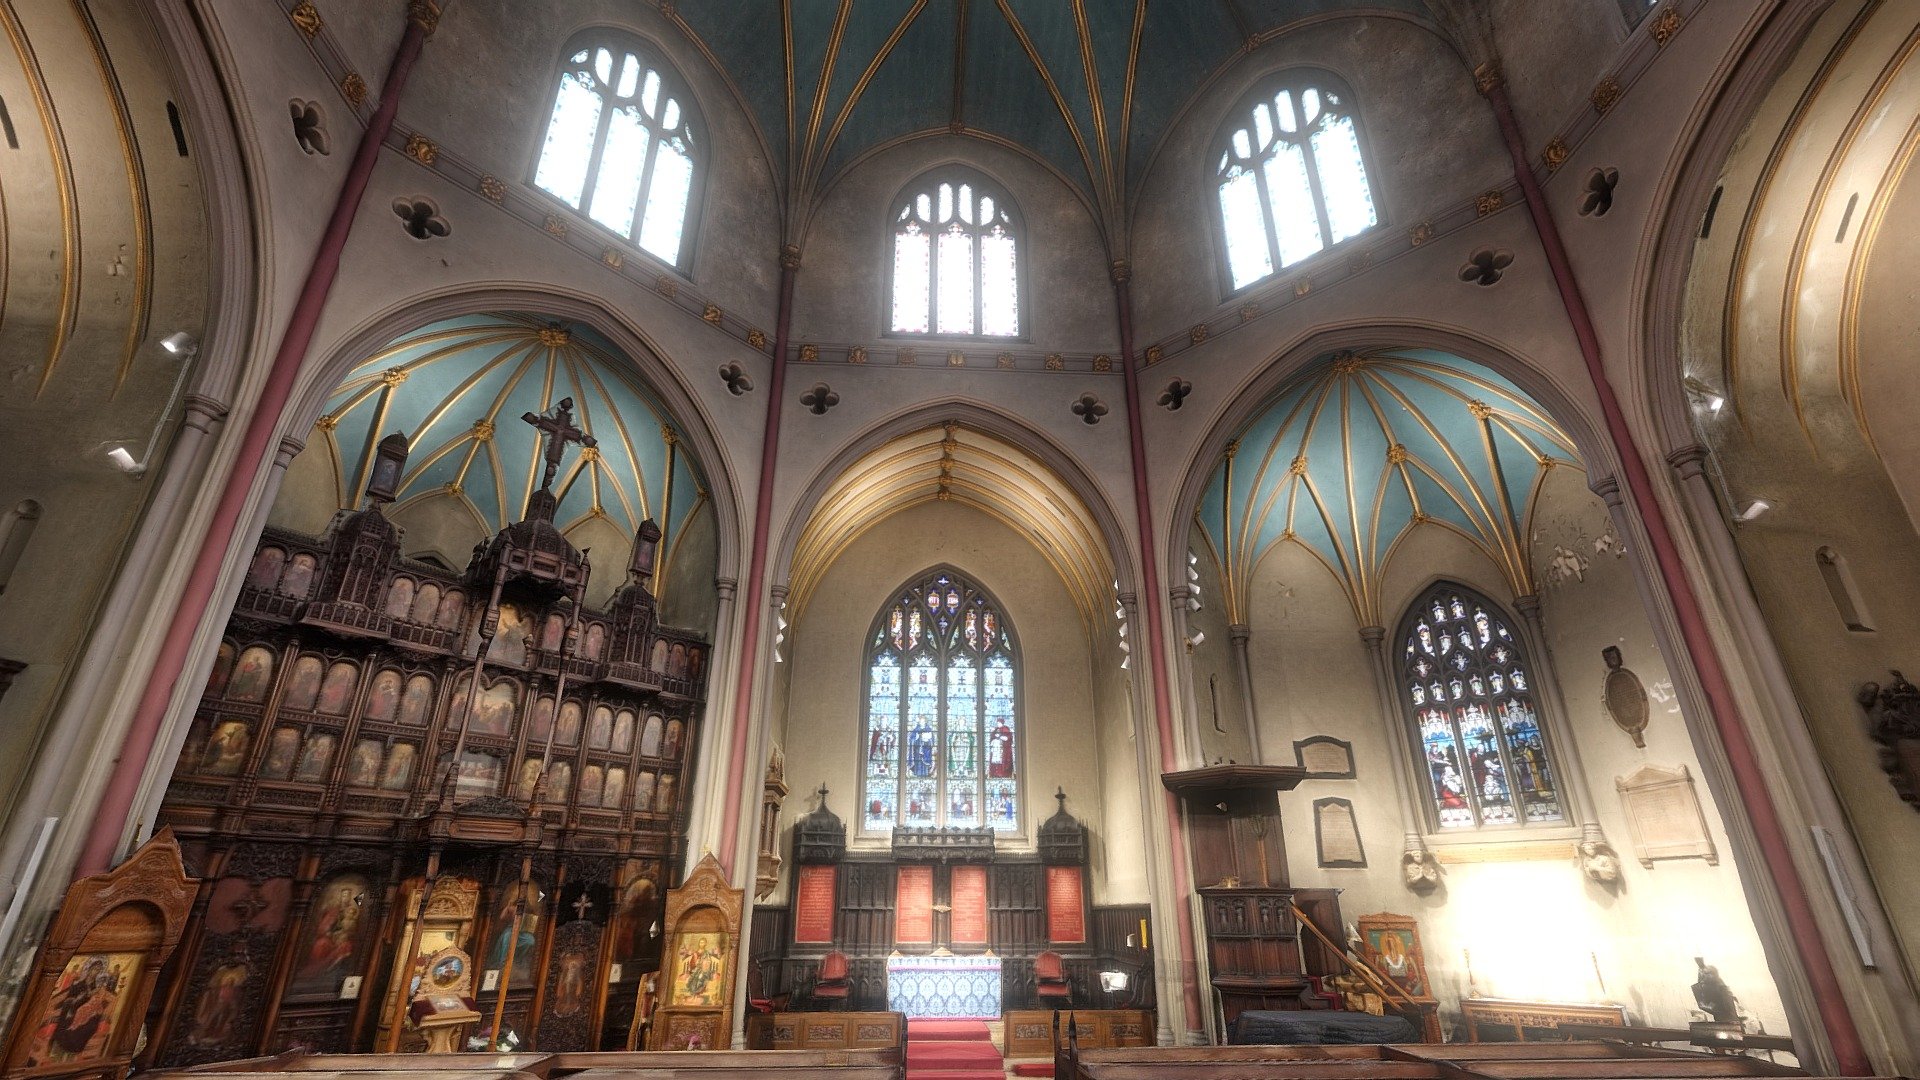 The interior of St Dunstan In The West, Fleet Street, London.

Date: 1830s.

https://www.stdunstaninthewest.org/
https://historicengland.org.uk/listing/the-list/list-entry/1064663

1199 photos taken in March 2023 with a Sony a7R III and processed in Reality Capture. 
Pews mesh heavily rebuilt. Large glass central lamp/chandelier removed because did not process correctly 3d model